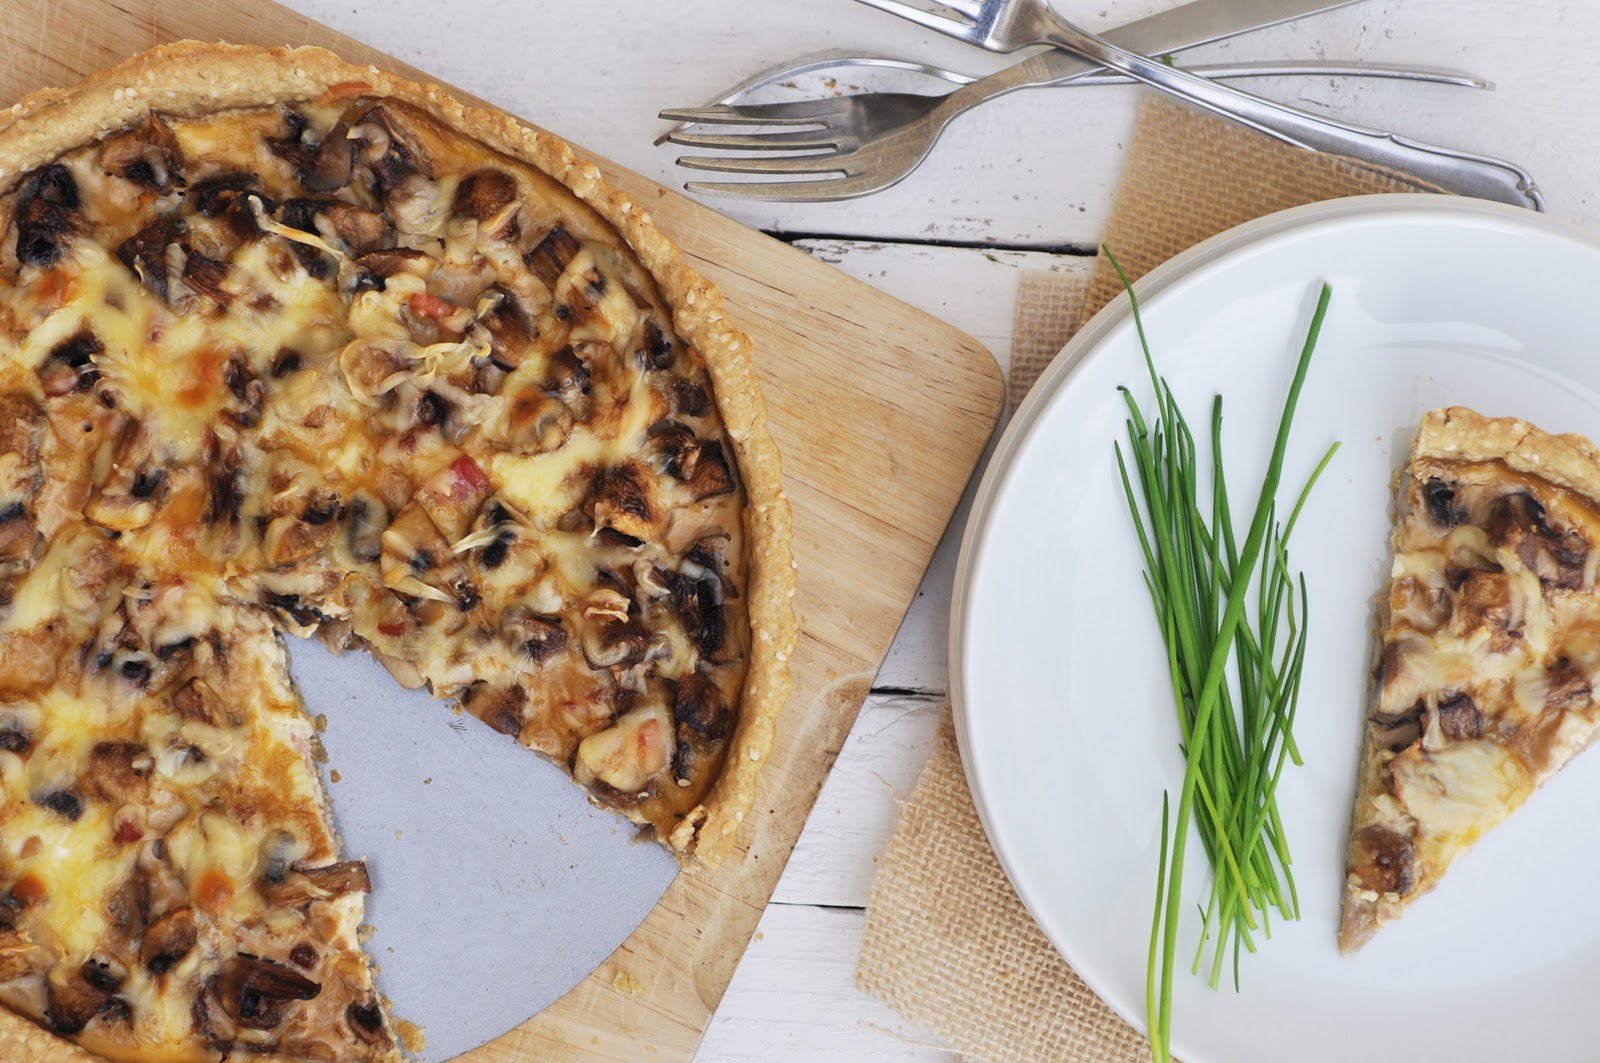 Anja's Food 4 Thought: Bacon Mushroom Quiche